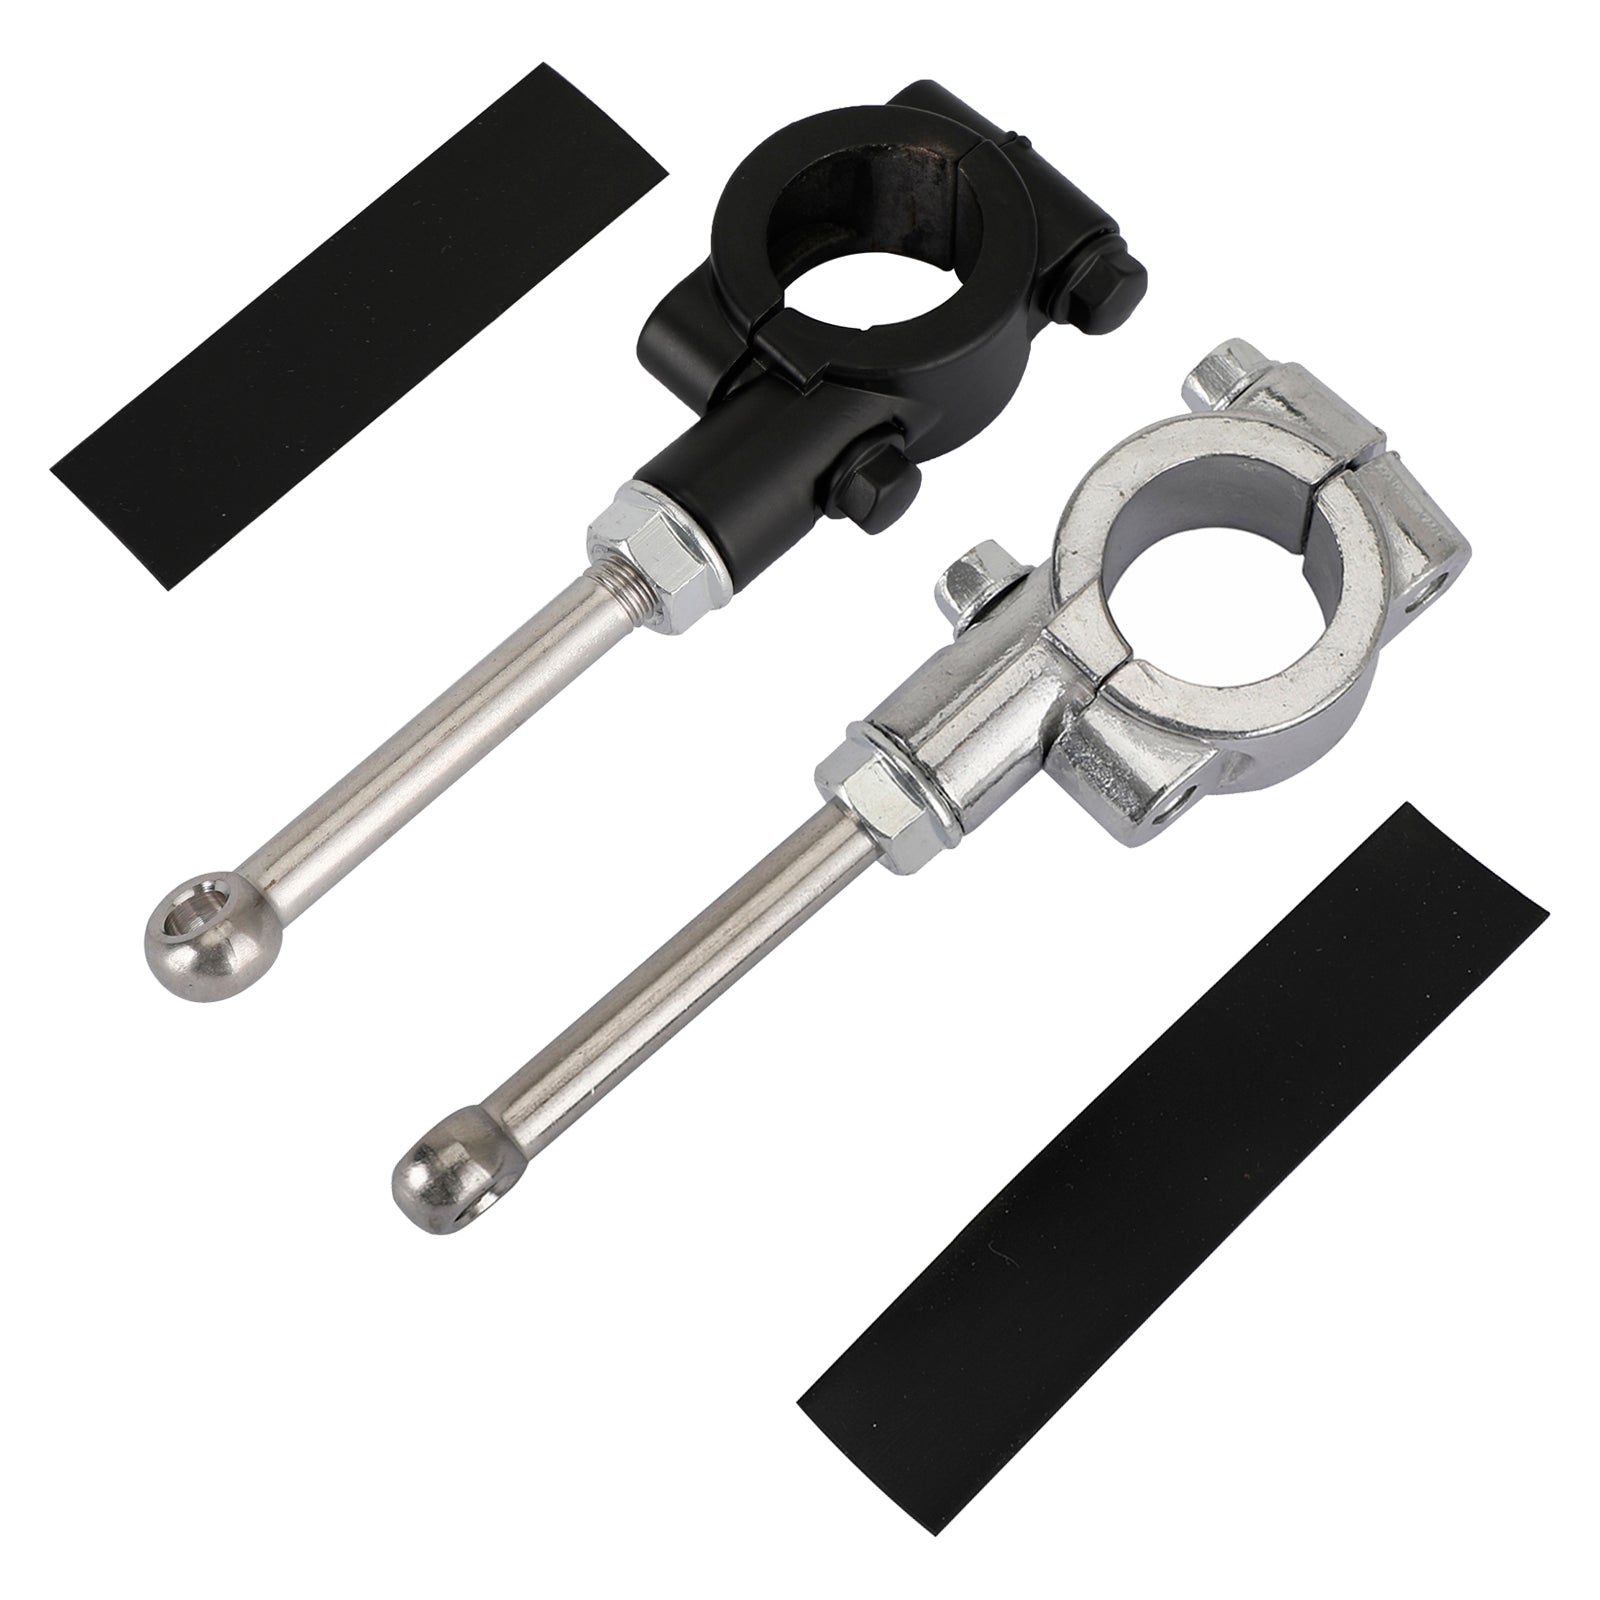 Universal Motorcycle Stand Kickstand Extension Kit 20-23MM Scooter Support Tool